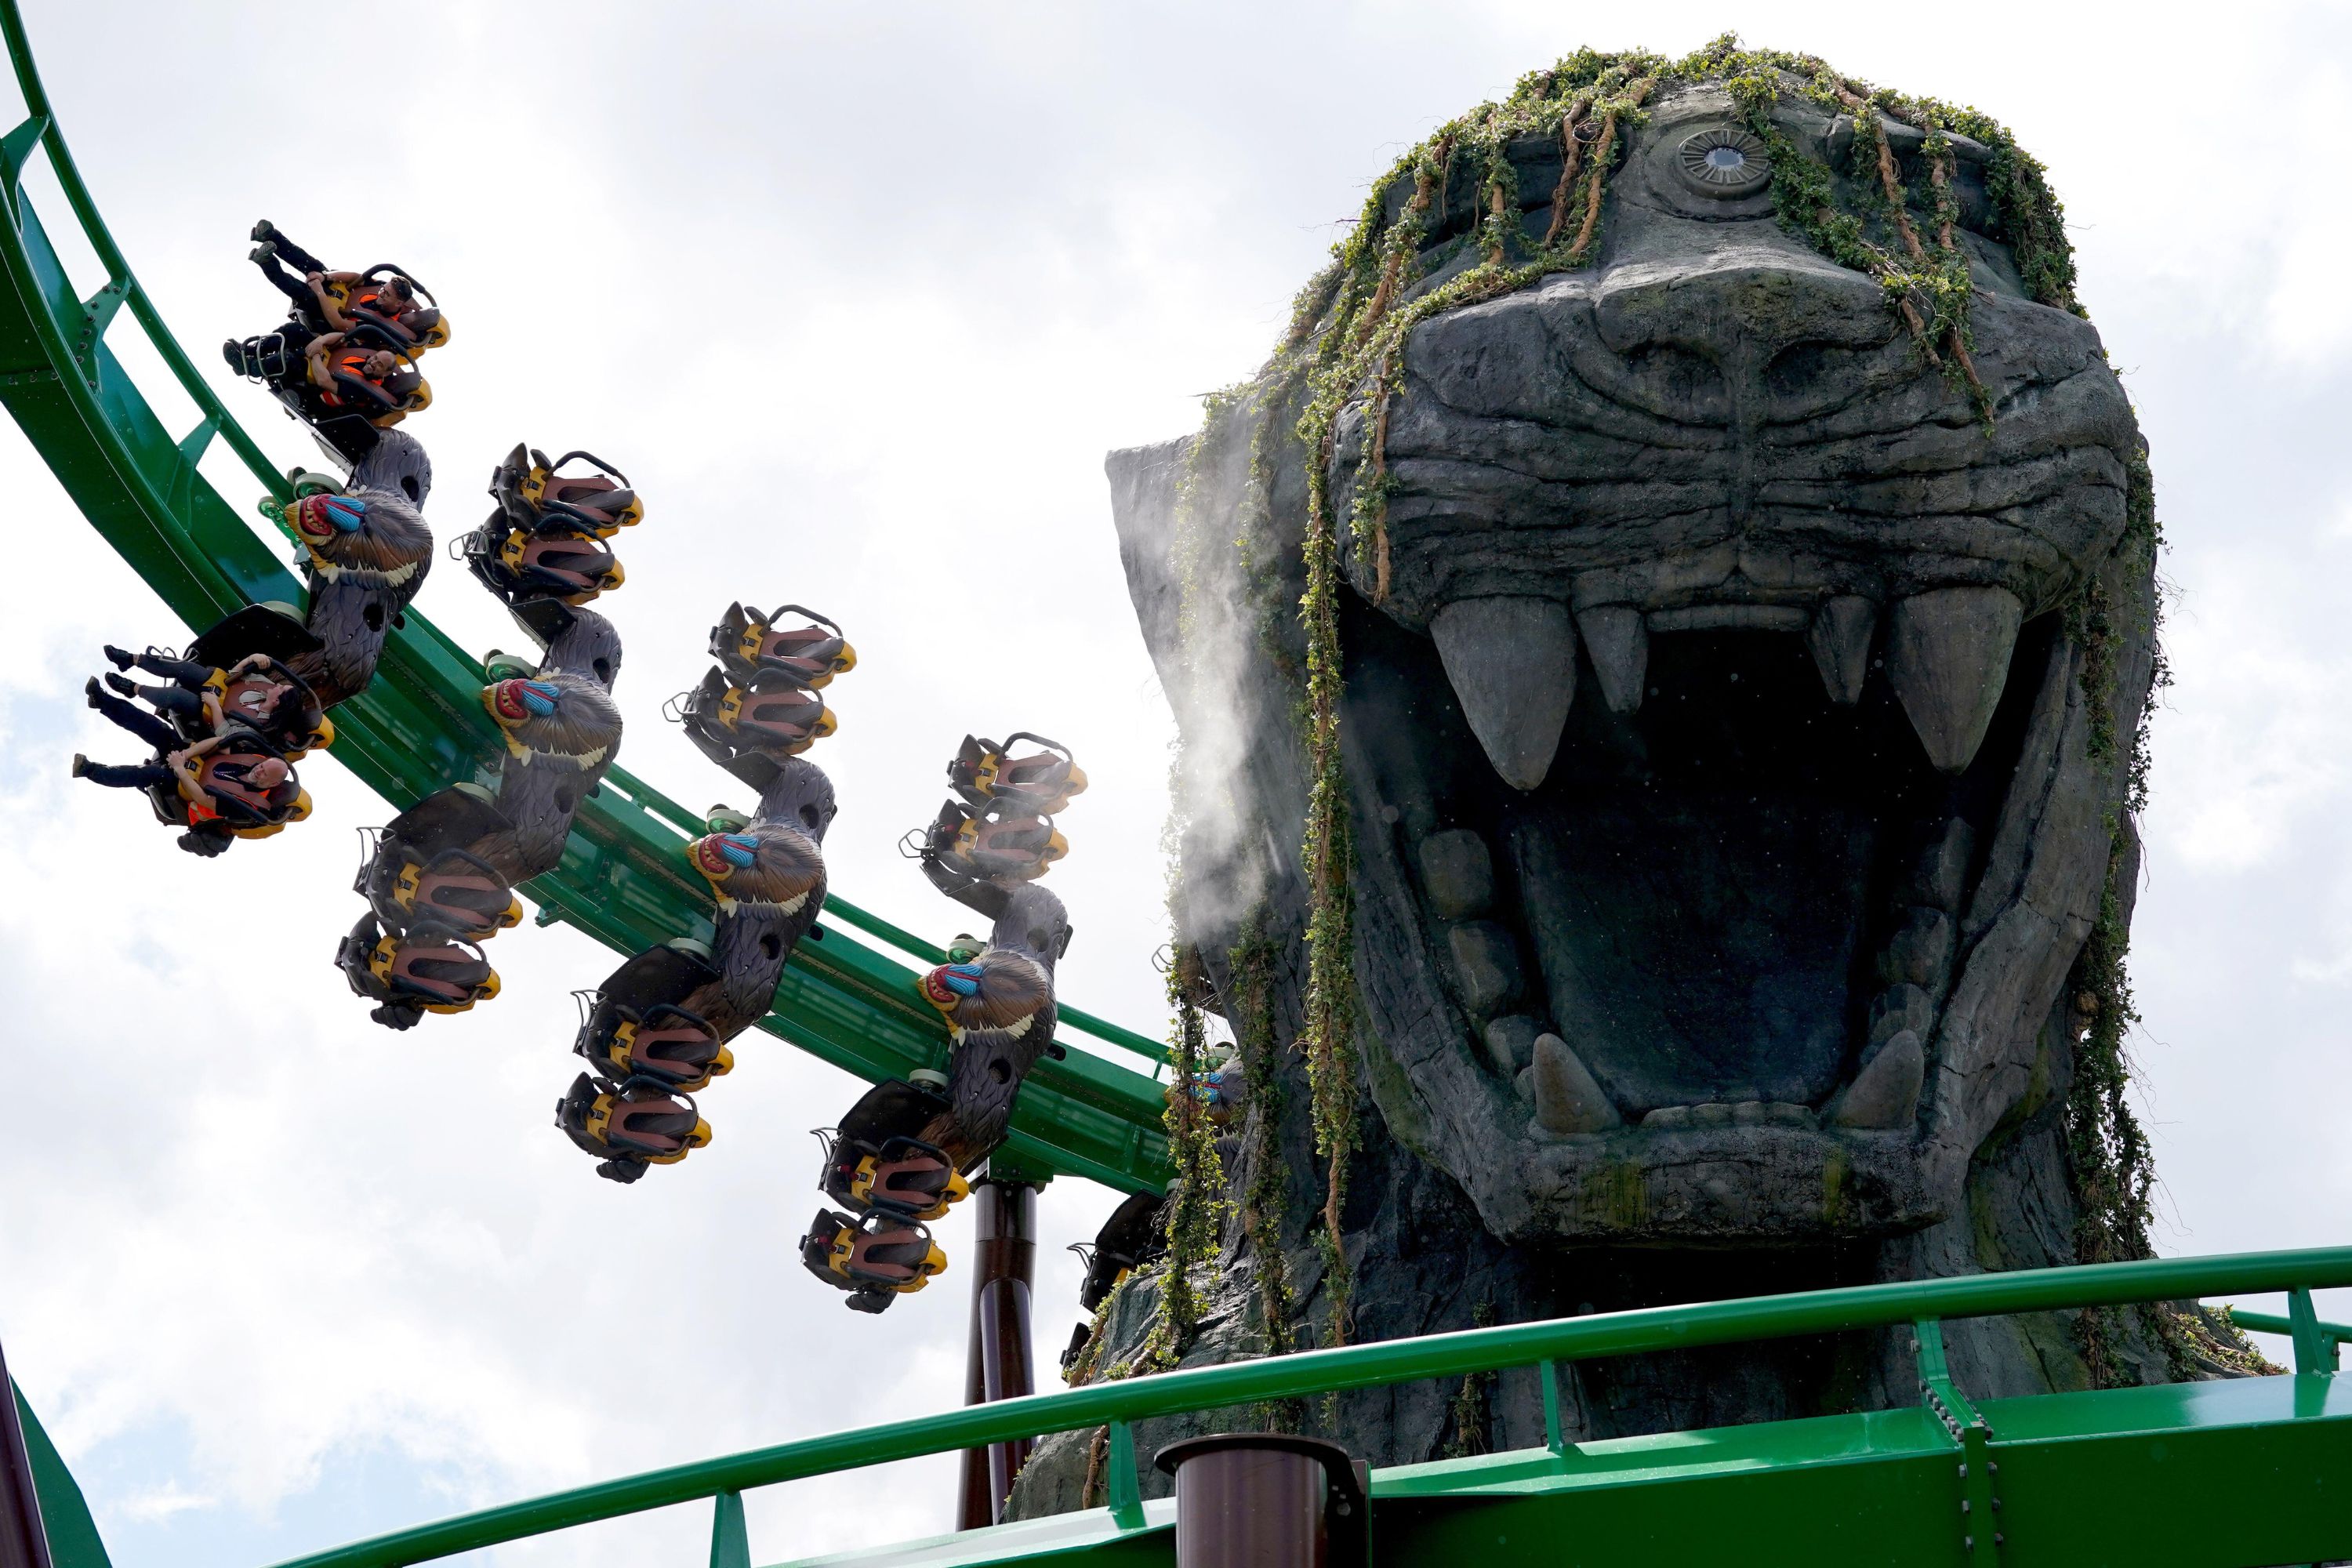 Park engineers test the world's only Jumanji rollercoaster, Mandrill Mayhem, at the launch of the new themed land, World of Jumanji, at Chessington World of Adventures Resort, south west London